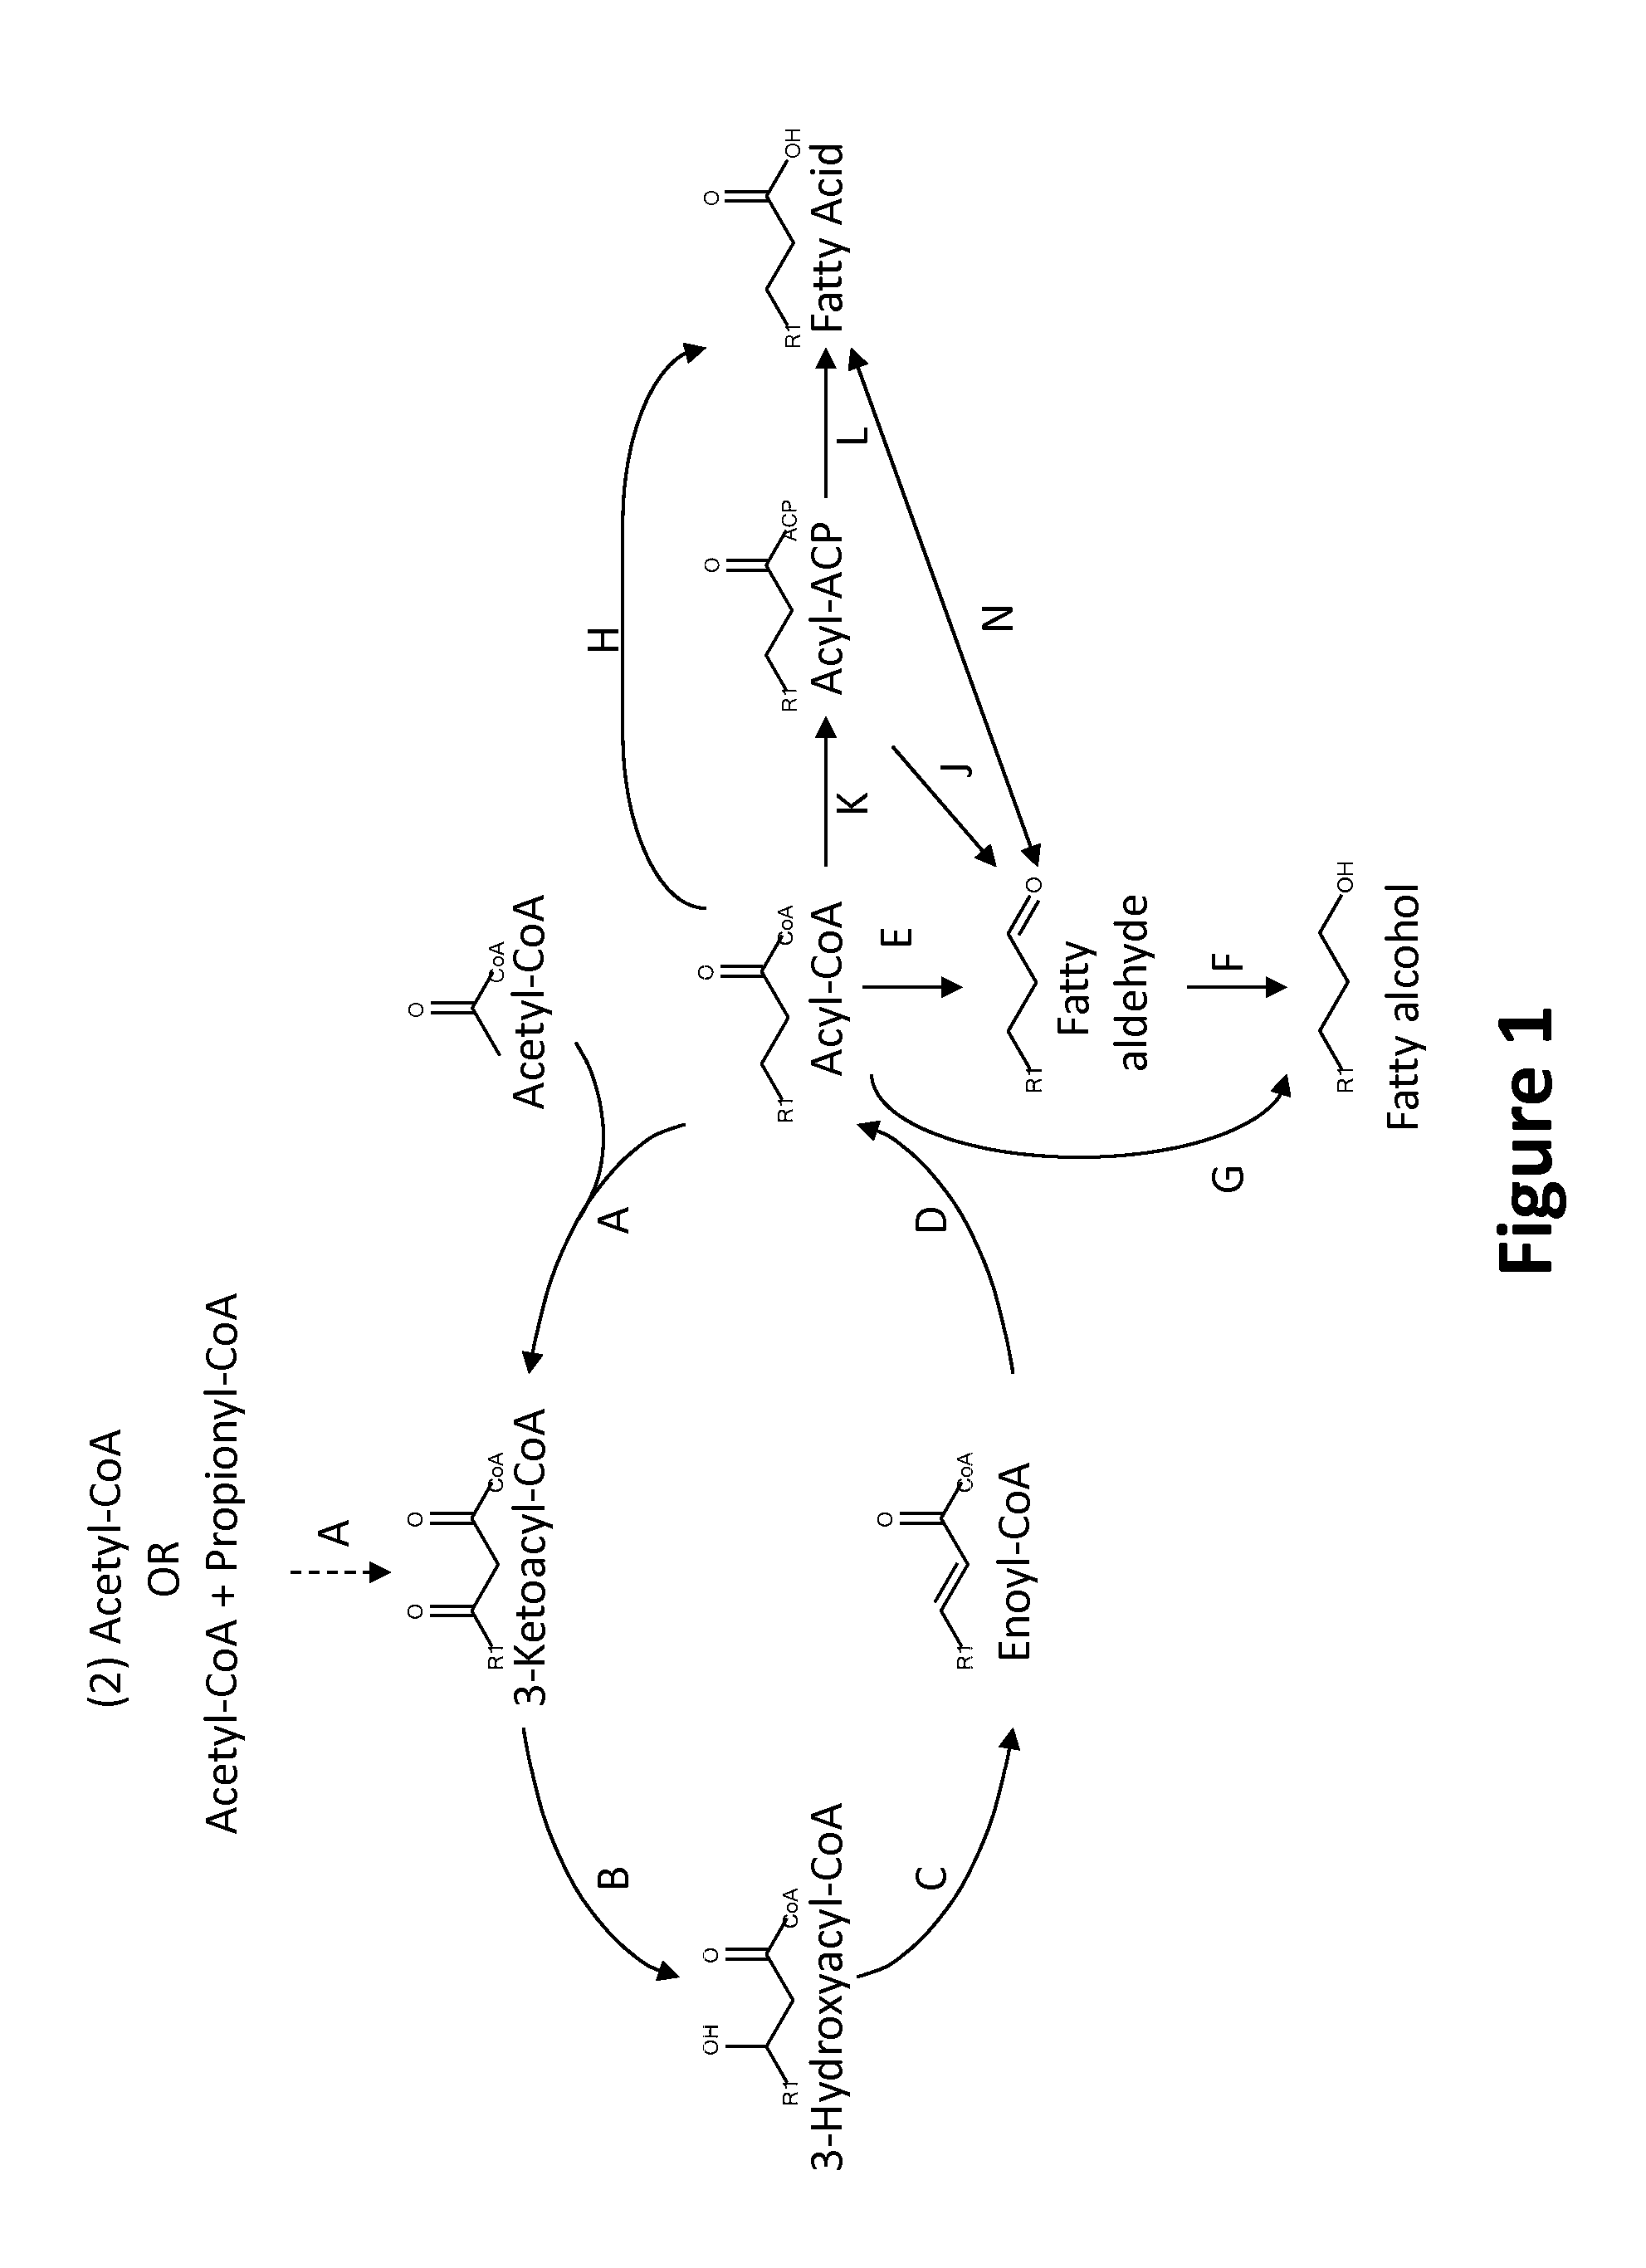 Microorganisms and methods for production of specific length fatty alcohols and related compounds